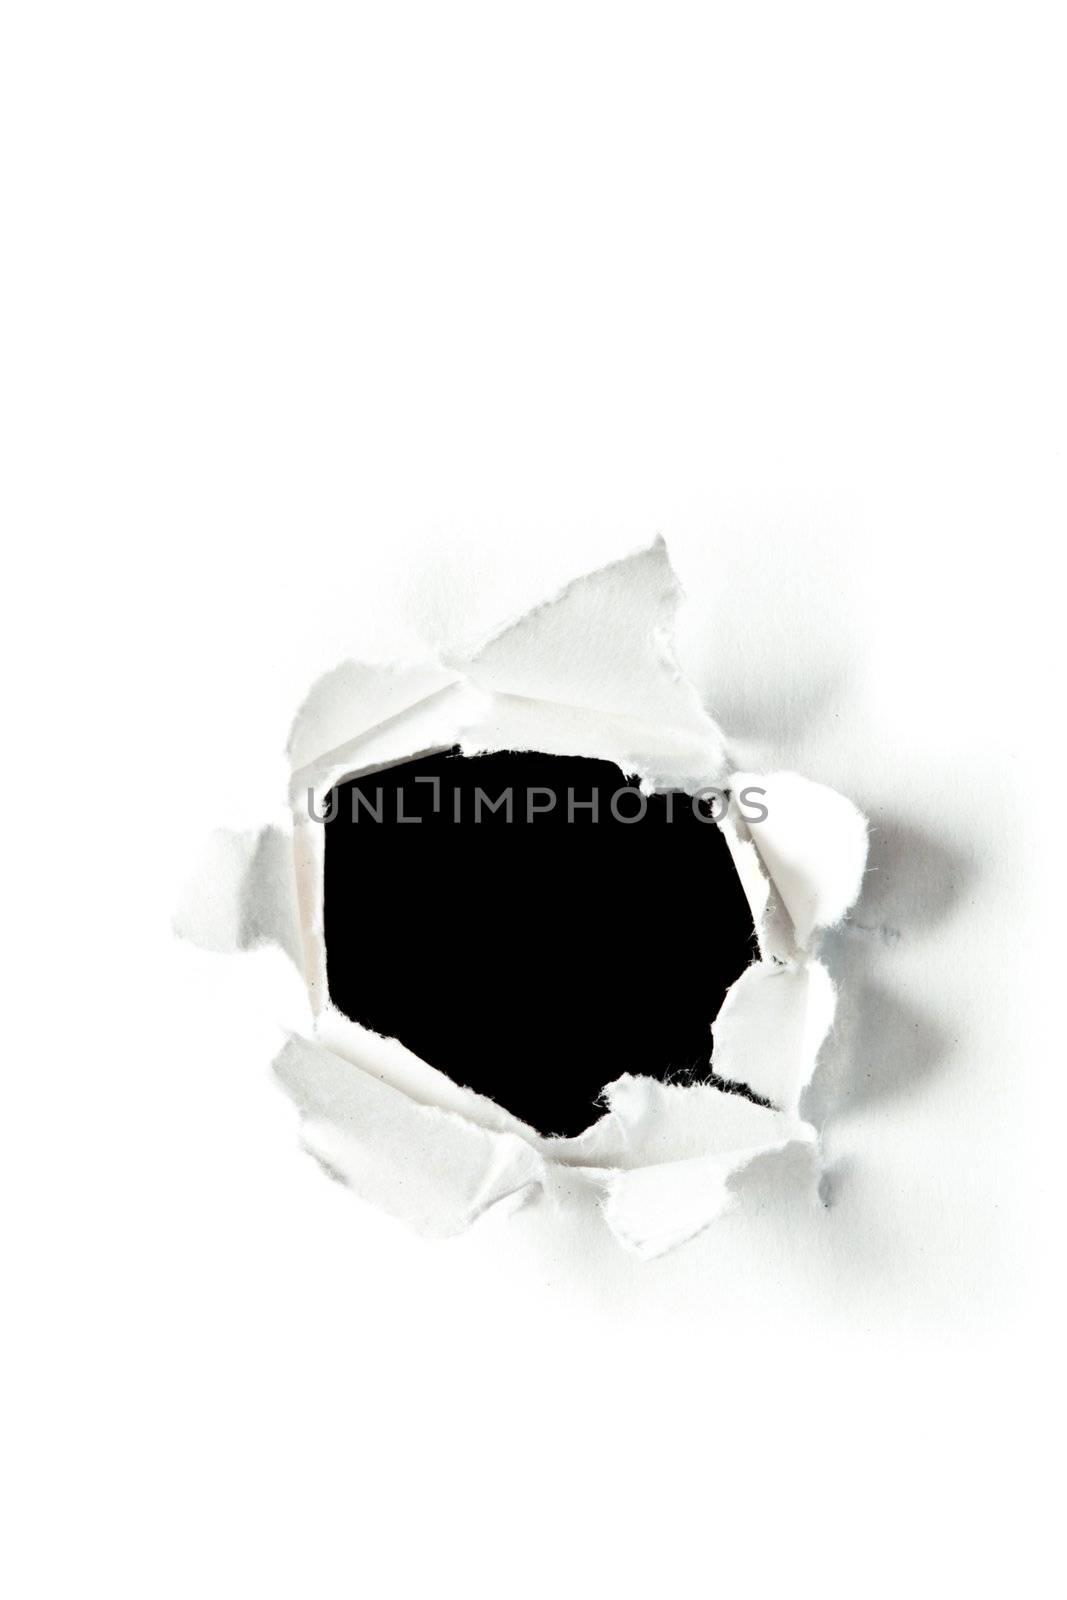 Circle hole in paper against white background